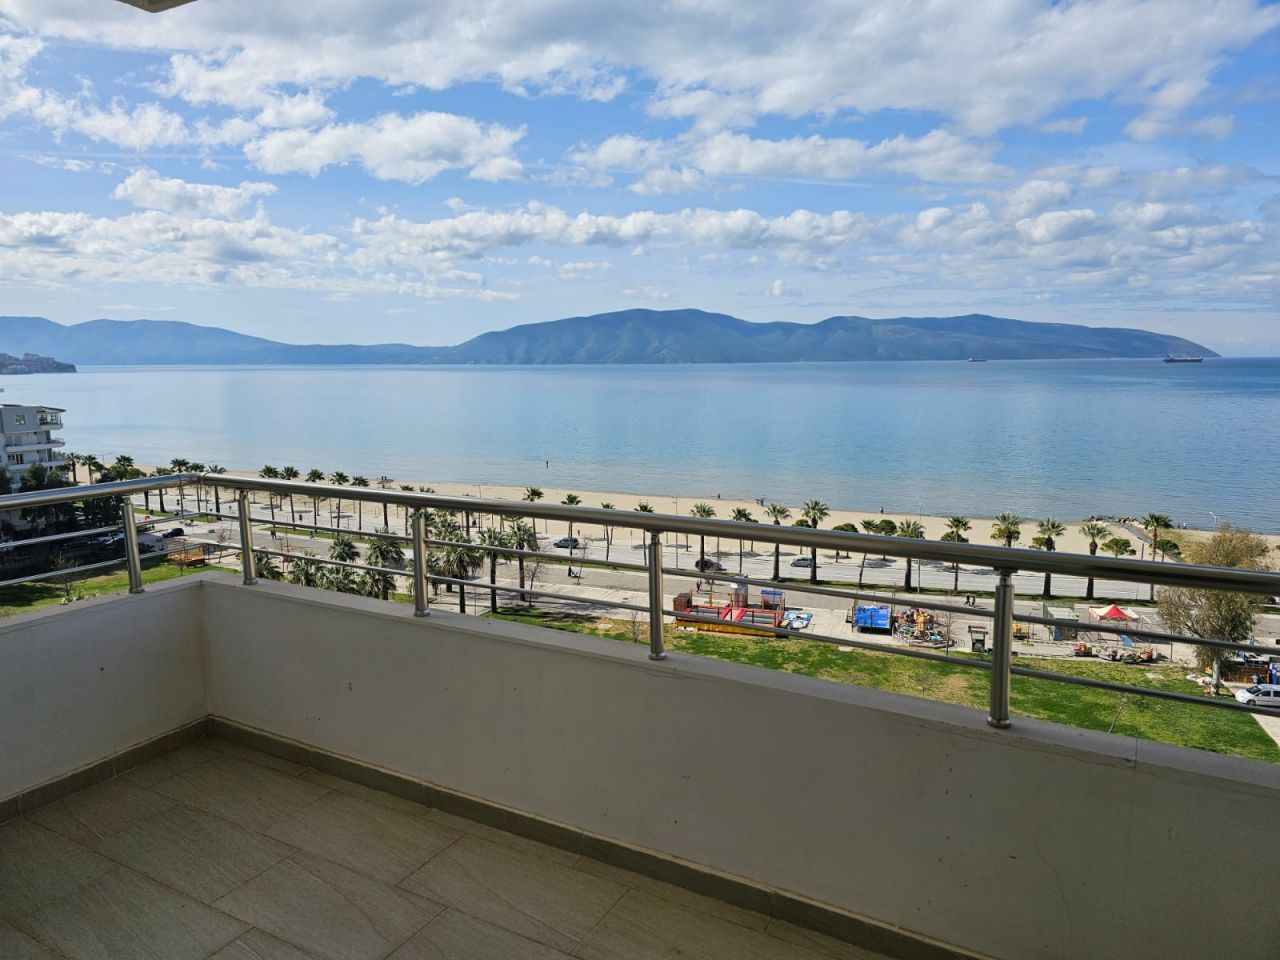 Apartment For Sale In Vlora Albania, Located In A Good Area, Just A Few Steps Away From The Beach